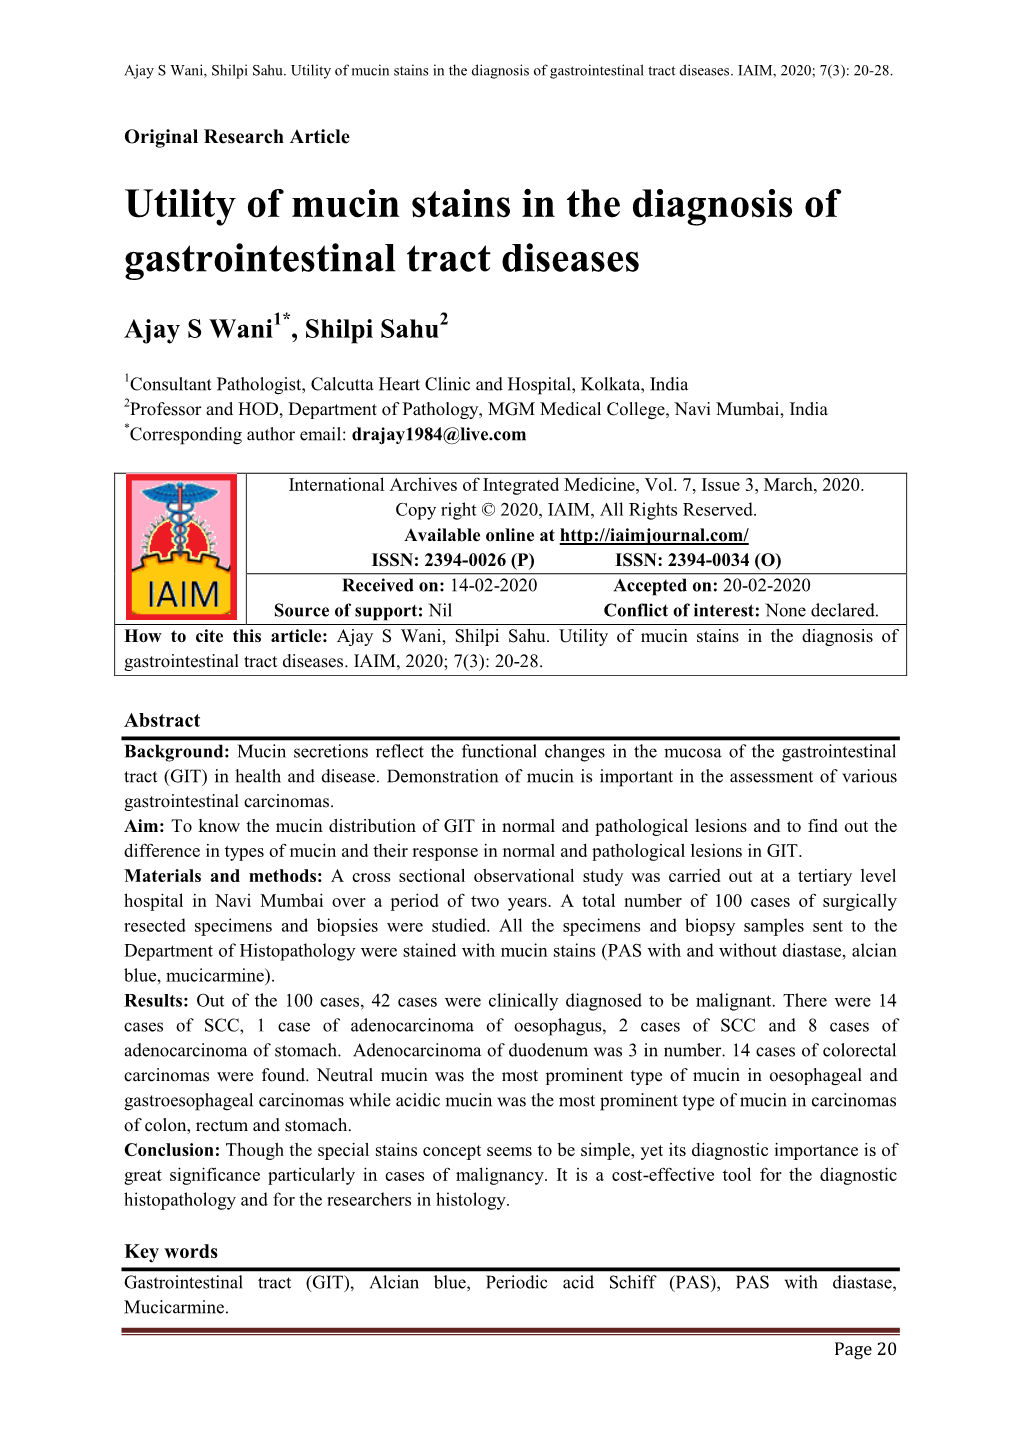 Utility of Mucin Stains in the Diagnosis of Gastrointestinal Tract Diseases